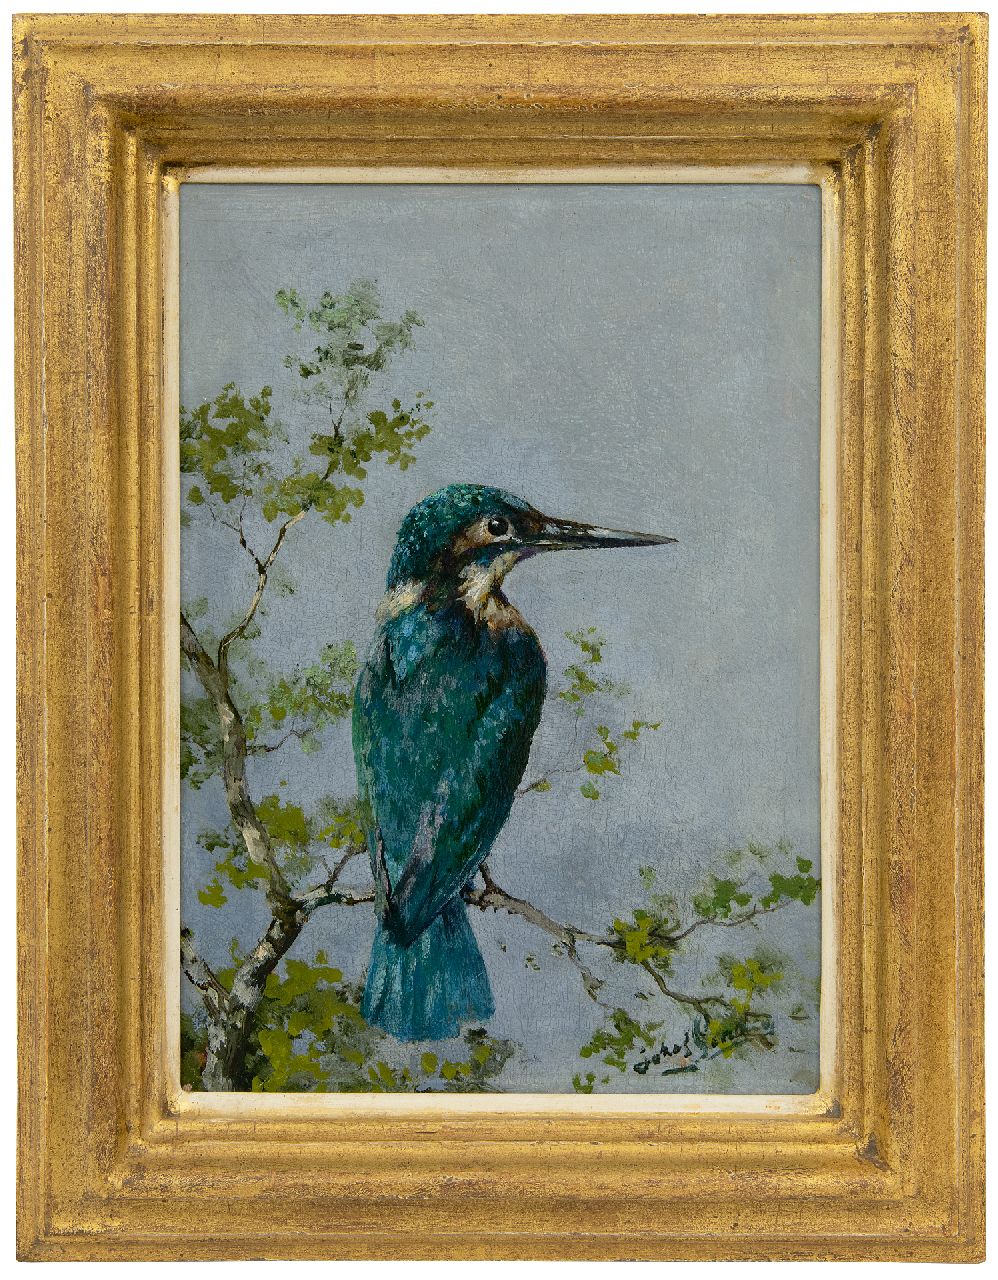 Gindra H.J.  | Hubert Joseph 'Jozef' Gindra | Paintings offered for sale | Kingfisher on a branch, oil on panel 28.5 x 20.1 cm, signed l.r.